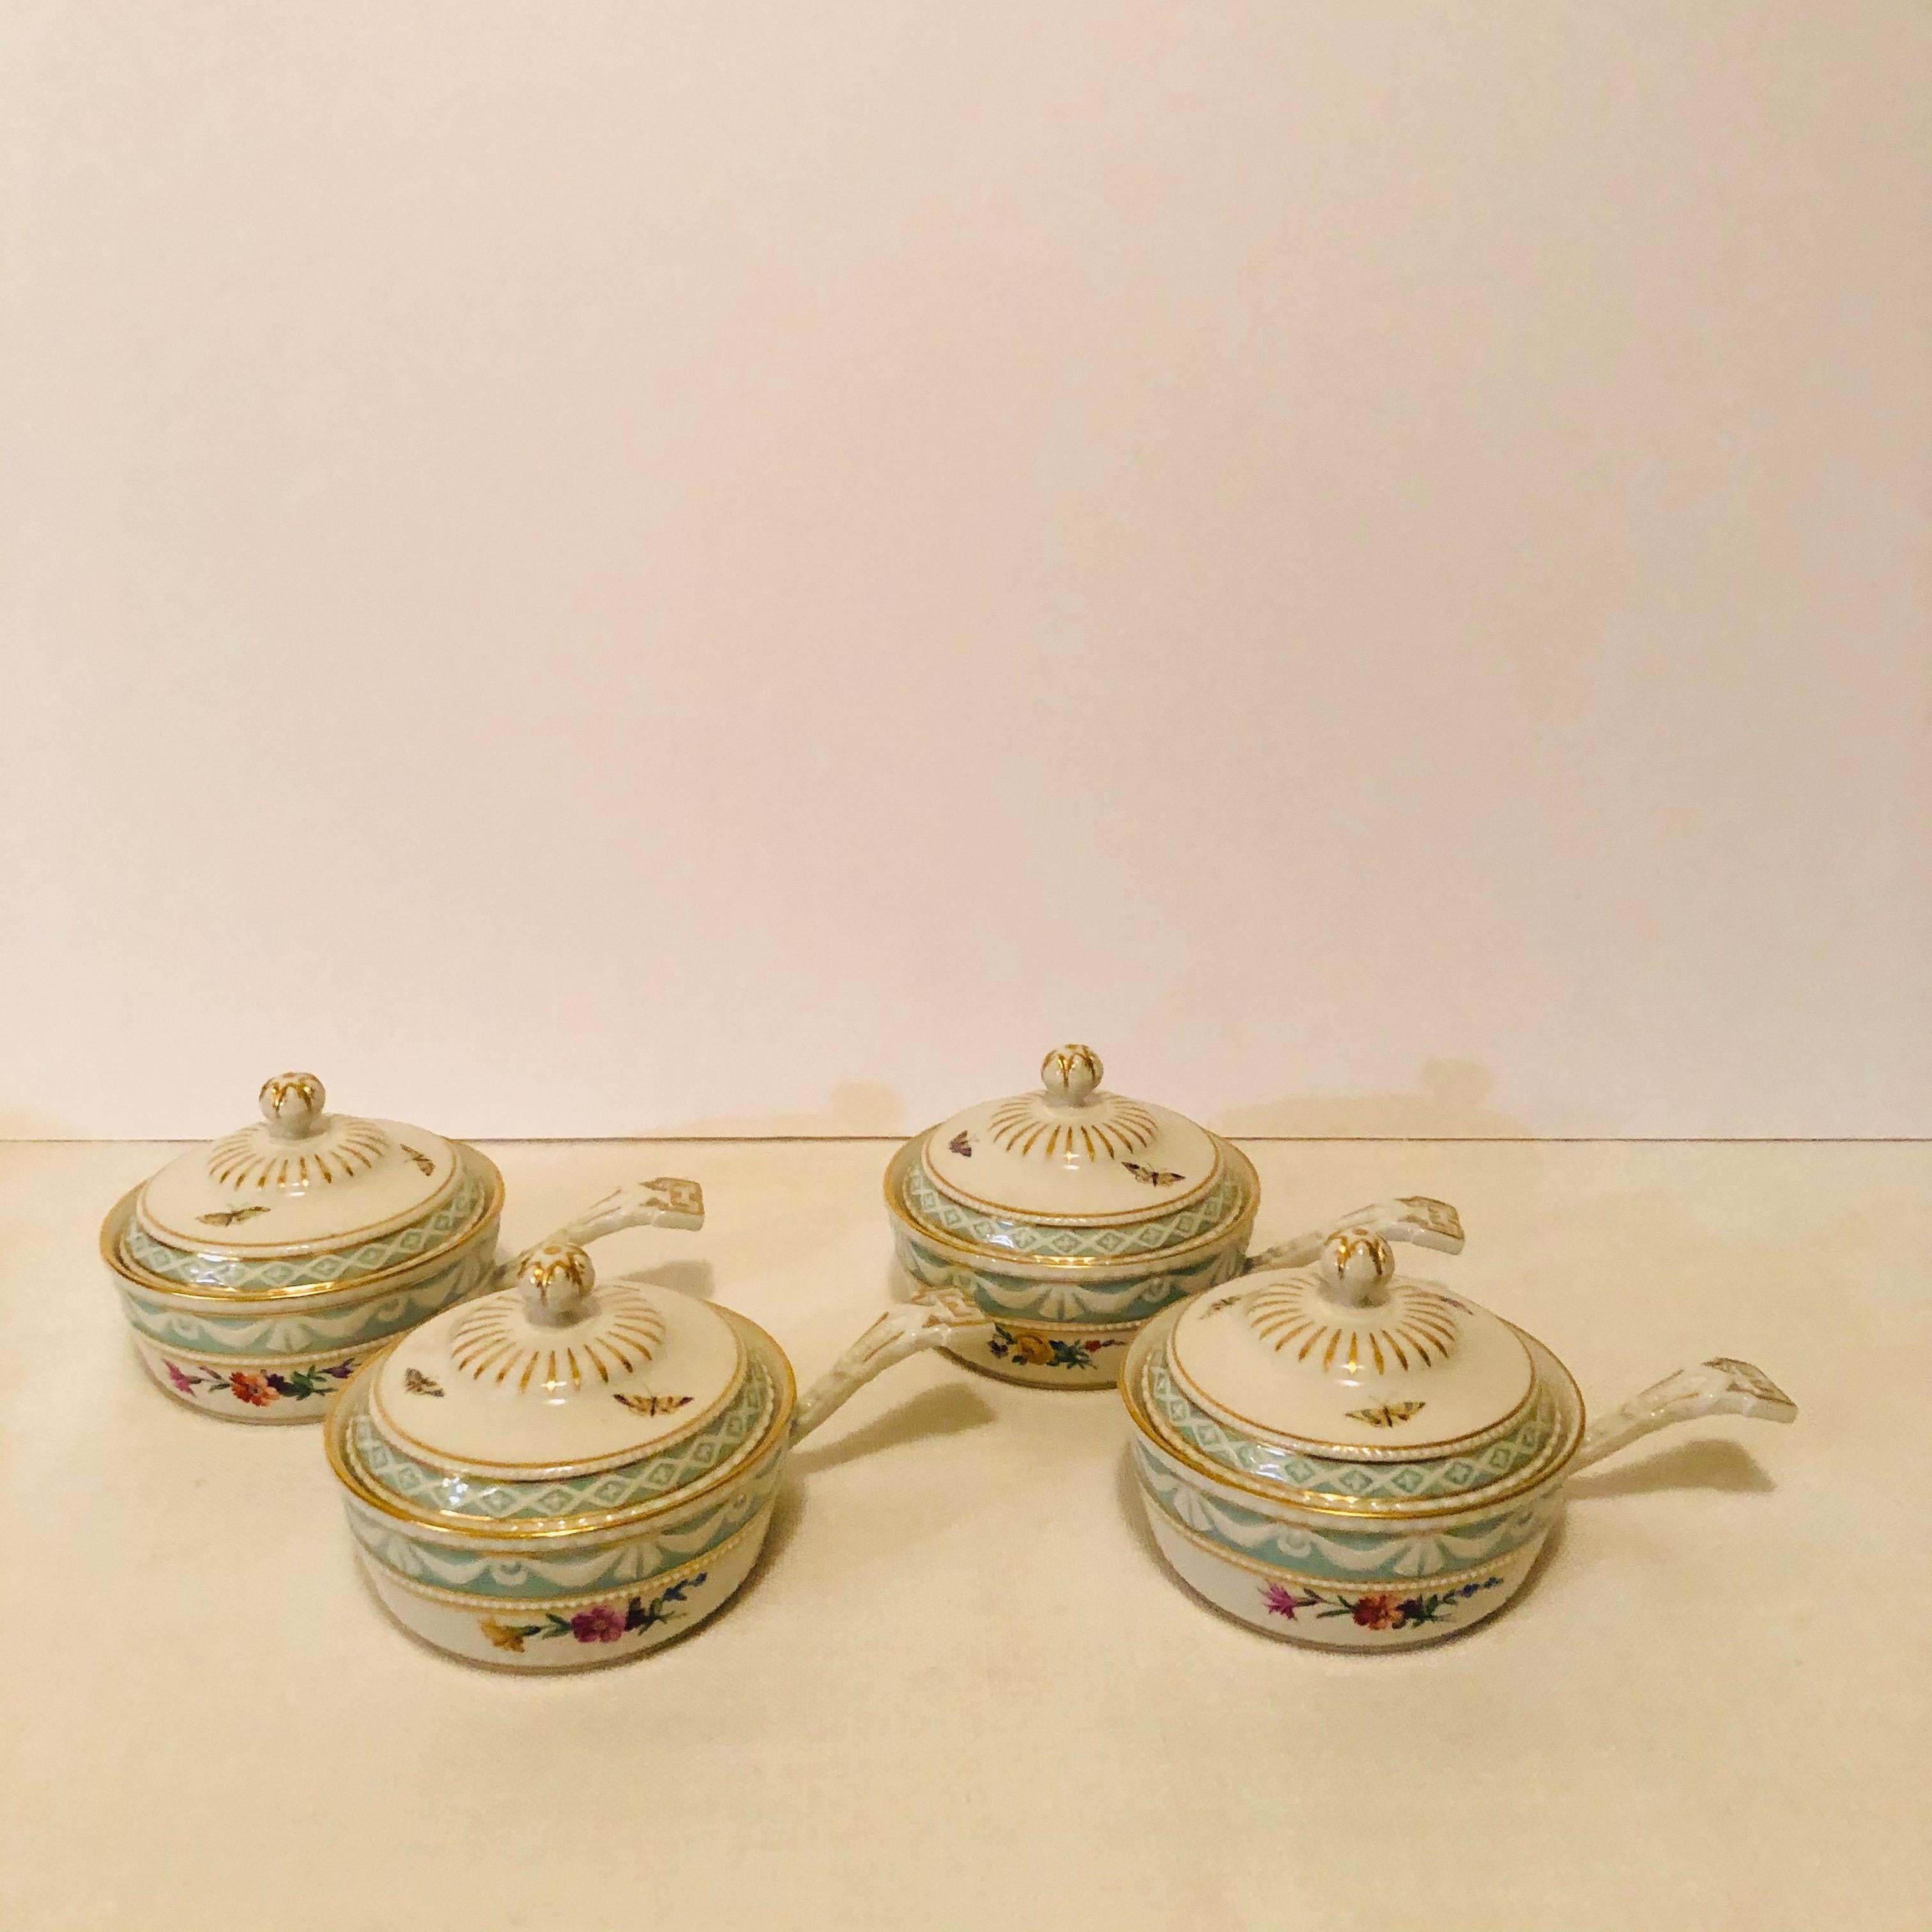 I would like to offer you this rare set of nine KPM pot de creme in the Kirkland pattern. Each pot de creme is painted with different flowers and different butterflies. They each have an aqua bottom with raised white ribbon decoration next to their